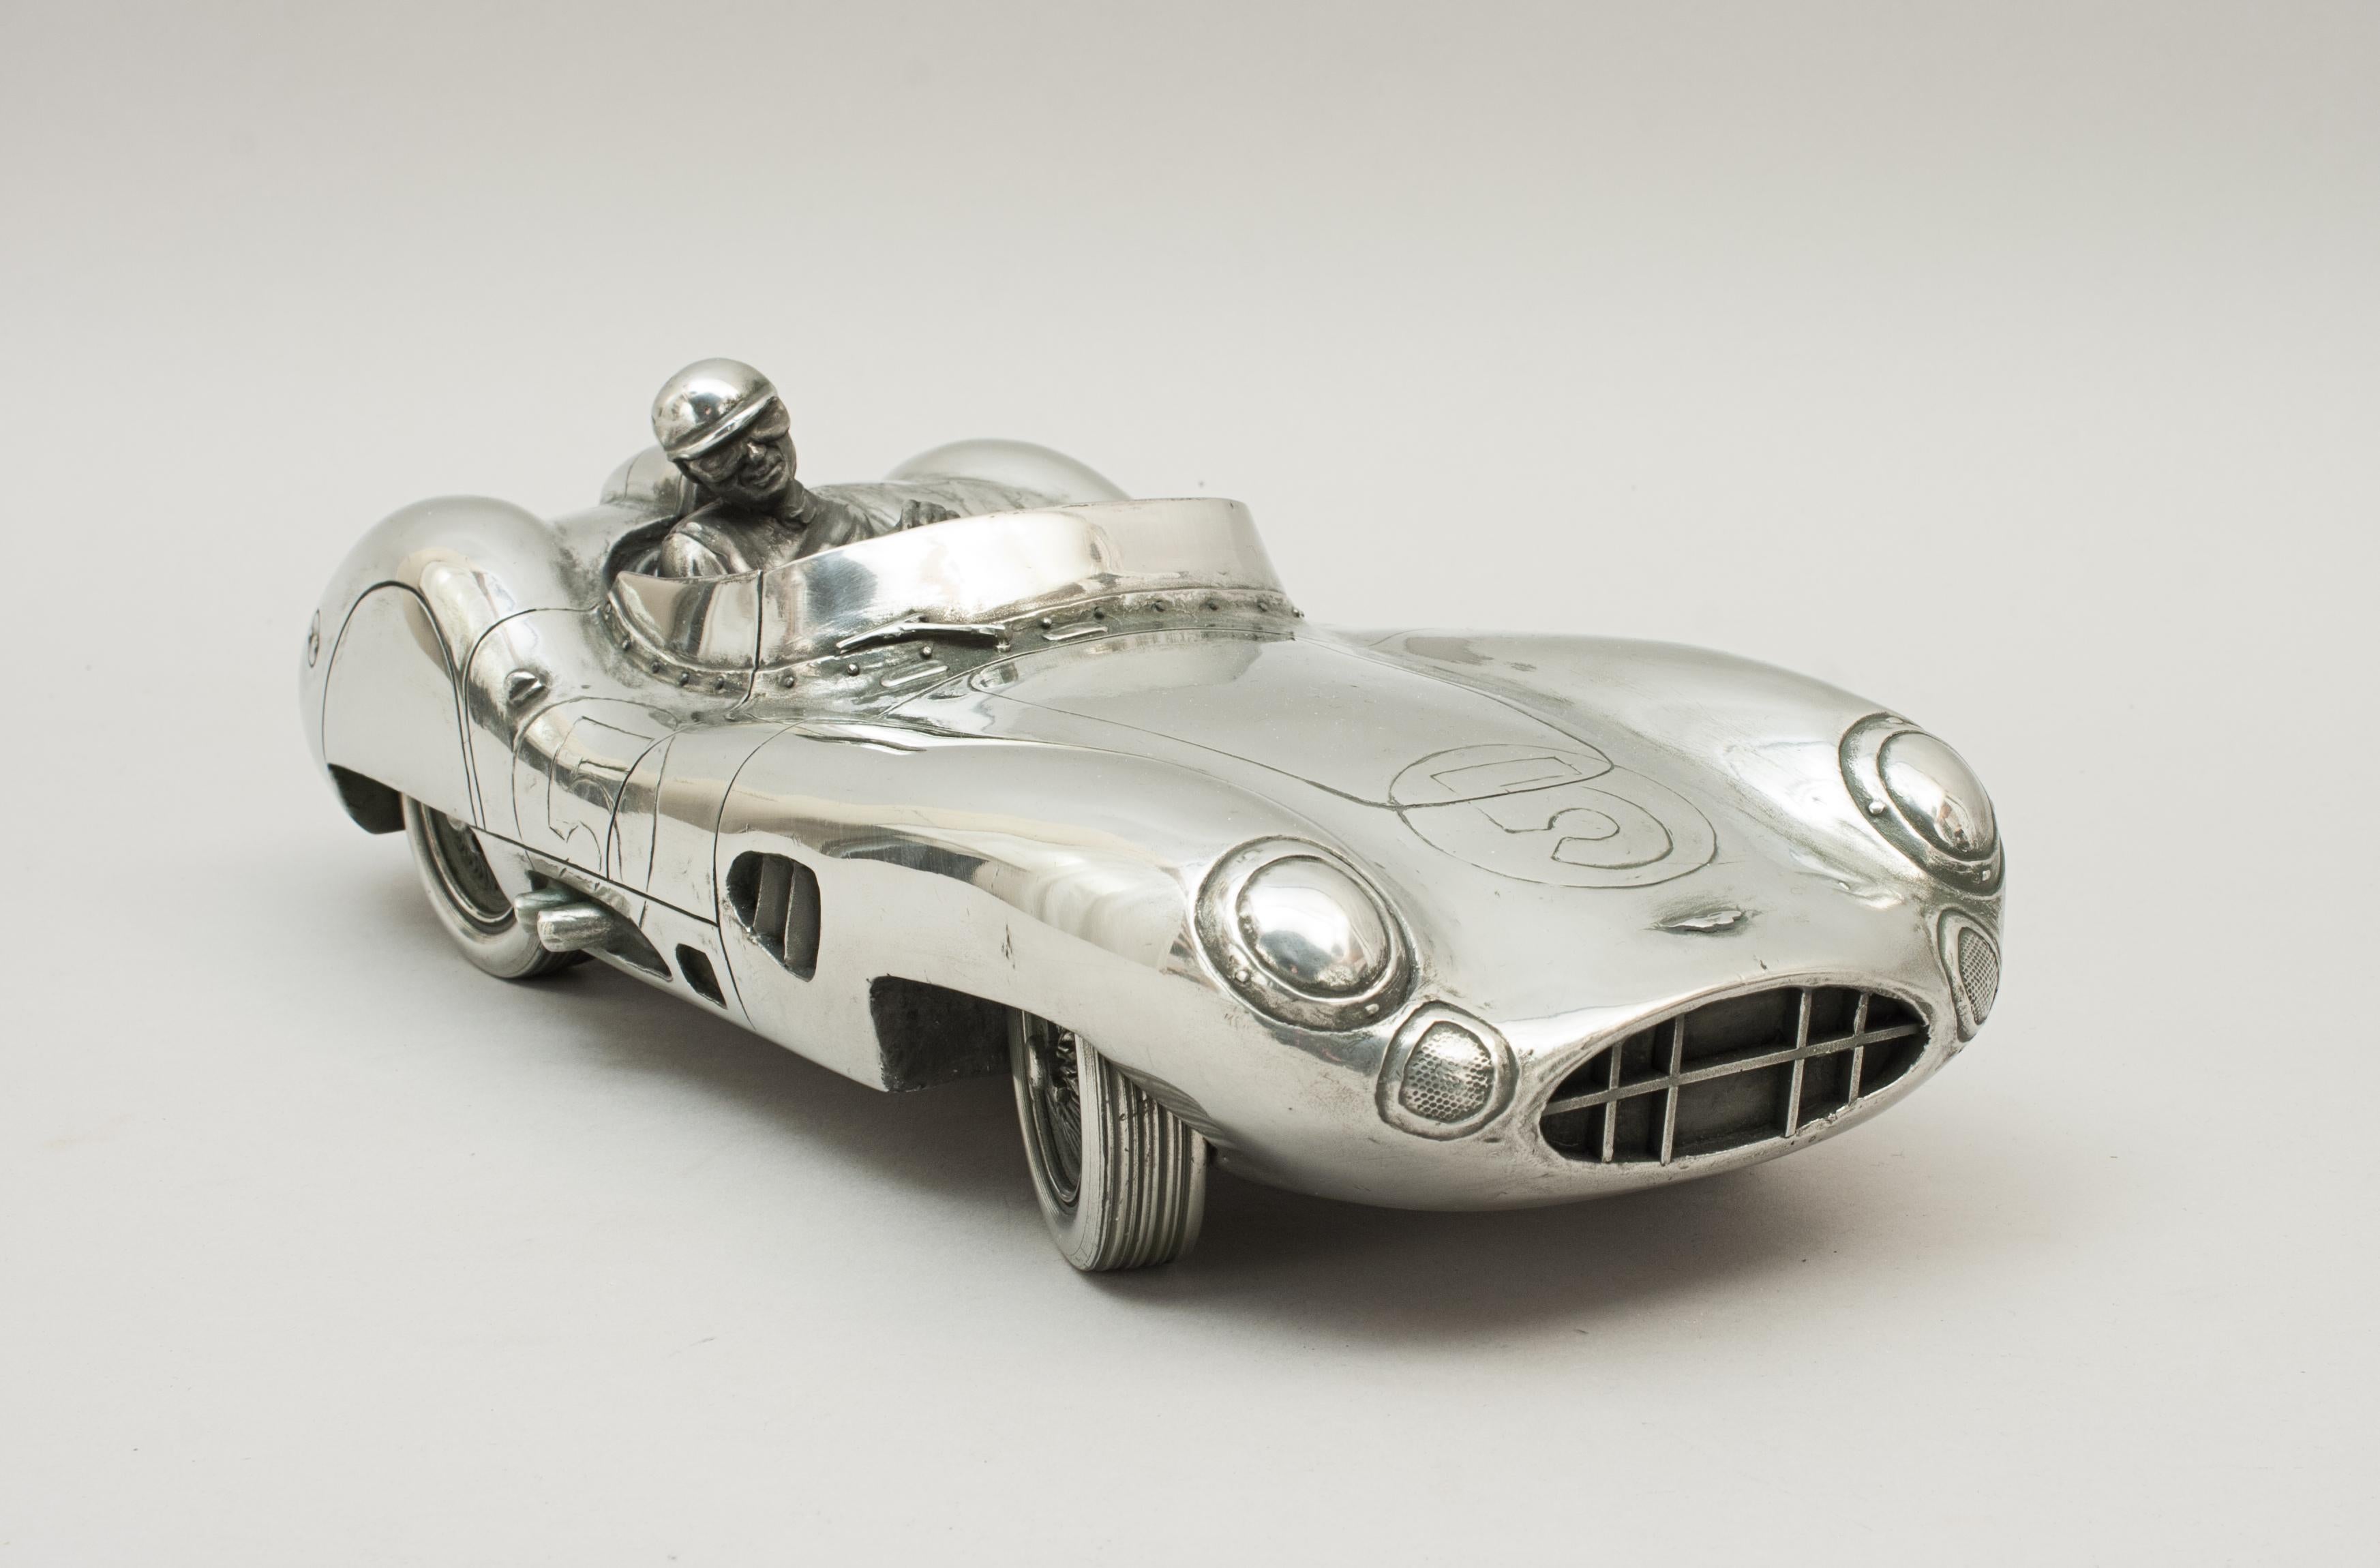 1959 Le Mans-winning #5 Aston Martin DBR1/2 by Compulsion Gallery.
The iconic 1950s Aston Martin DBR sports car is crafted by an innovative process, quite unique to Compulsion Gallery. Their sculptures are all hand cast in a special high density